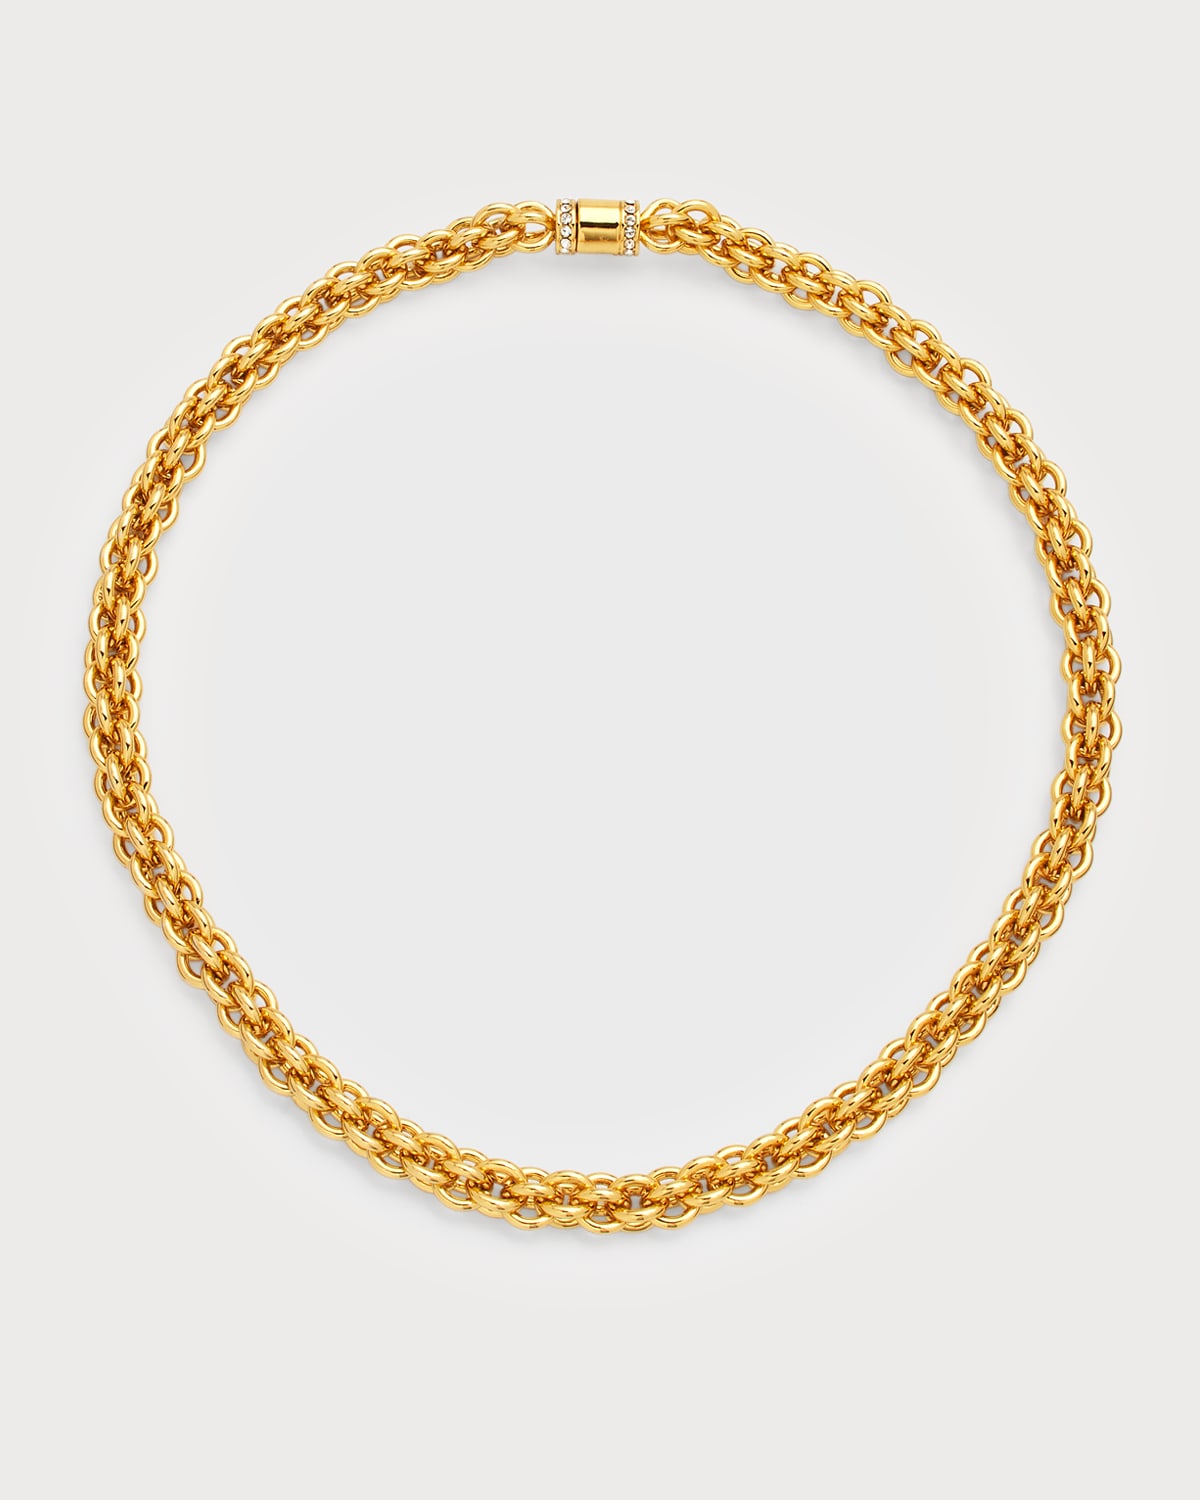 DEMARSON Dylan Braided Rope Necklace